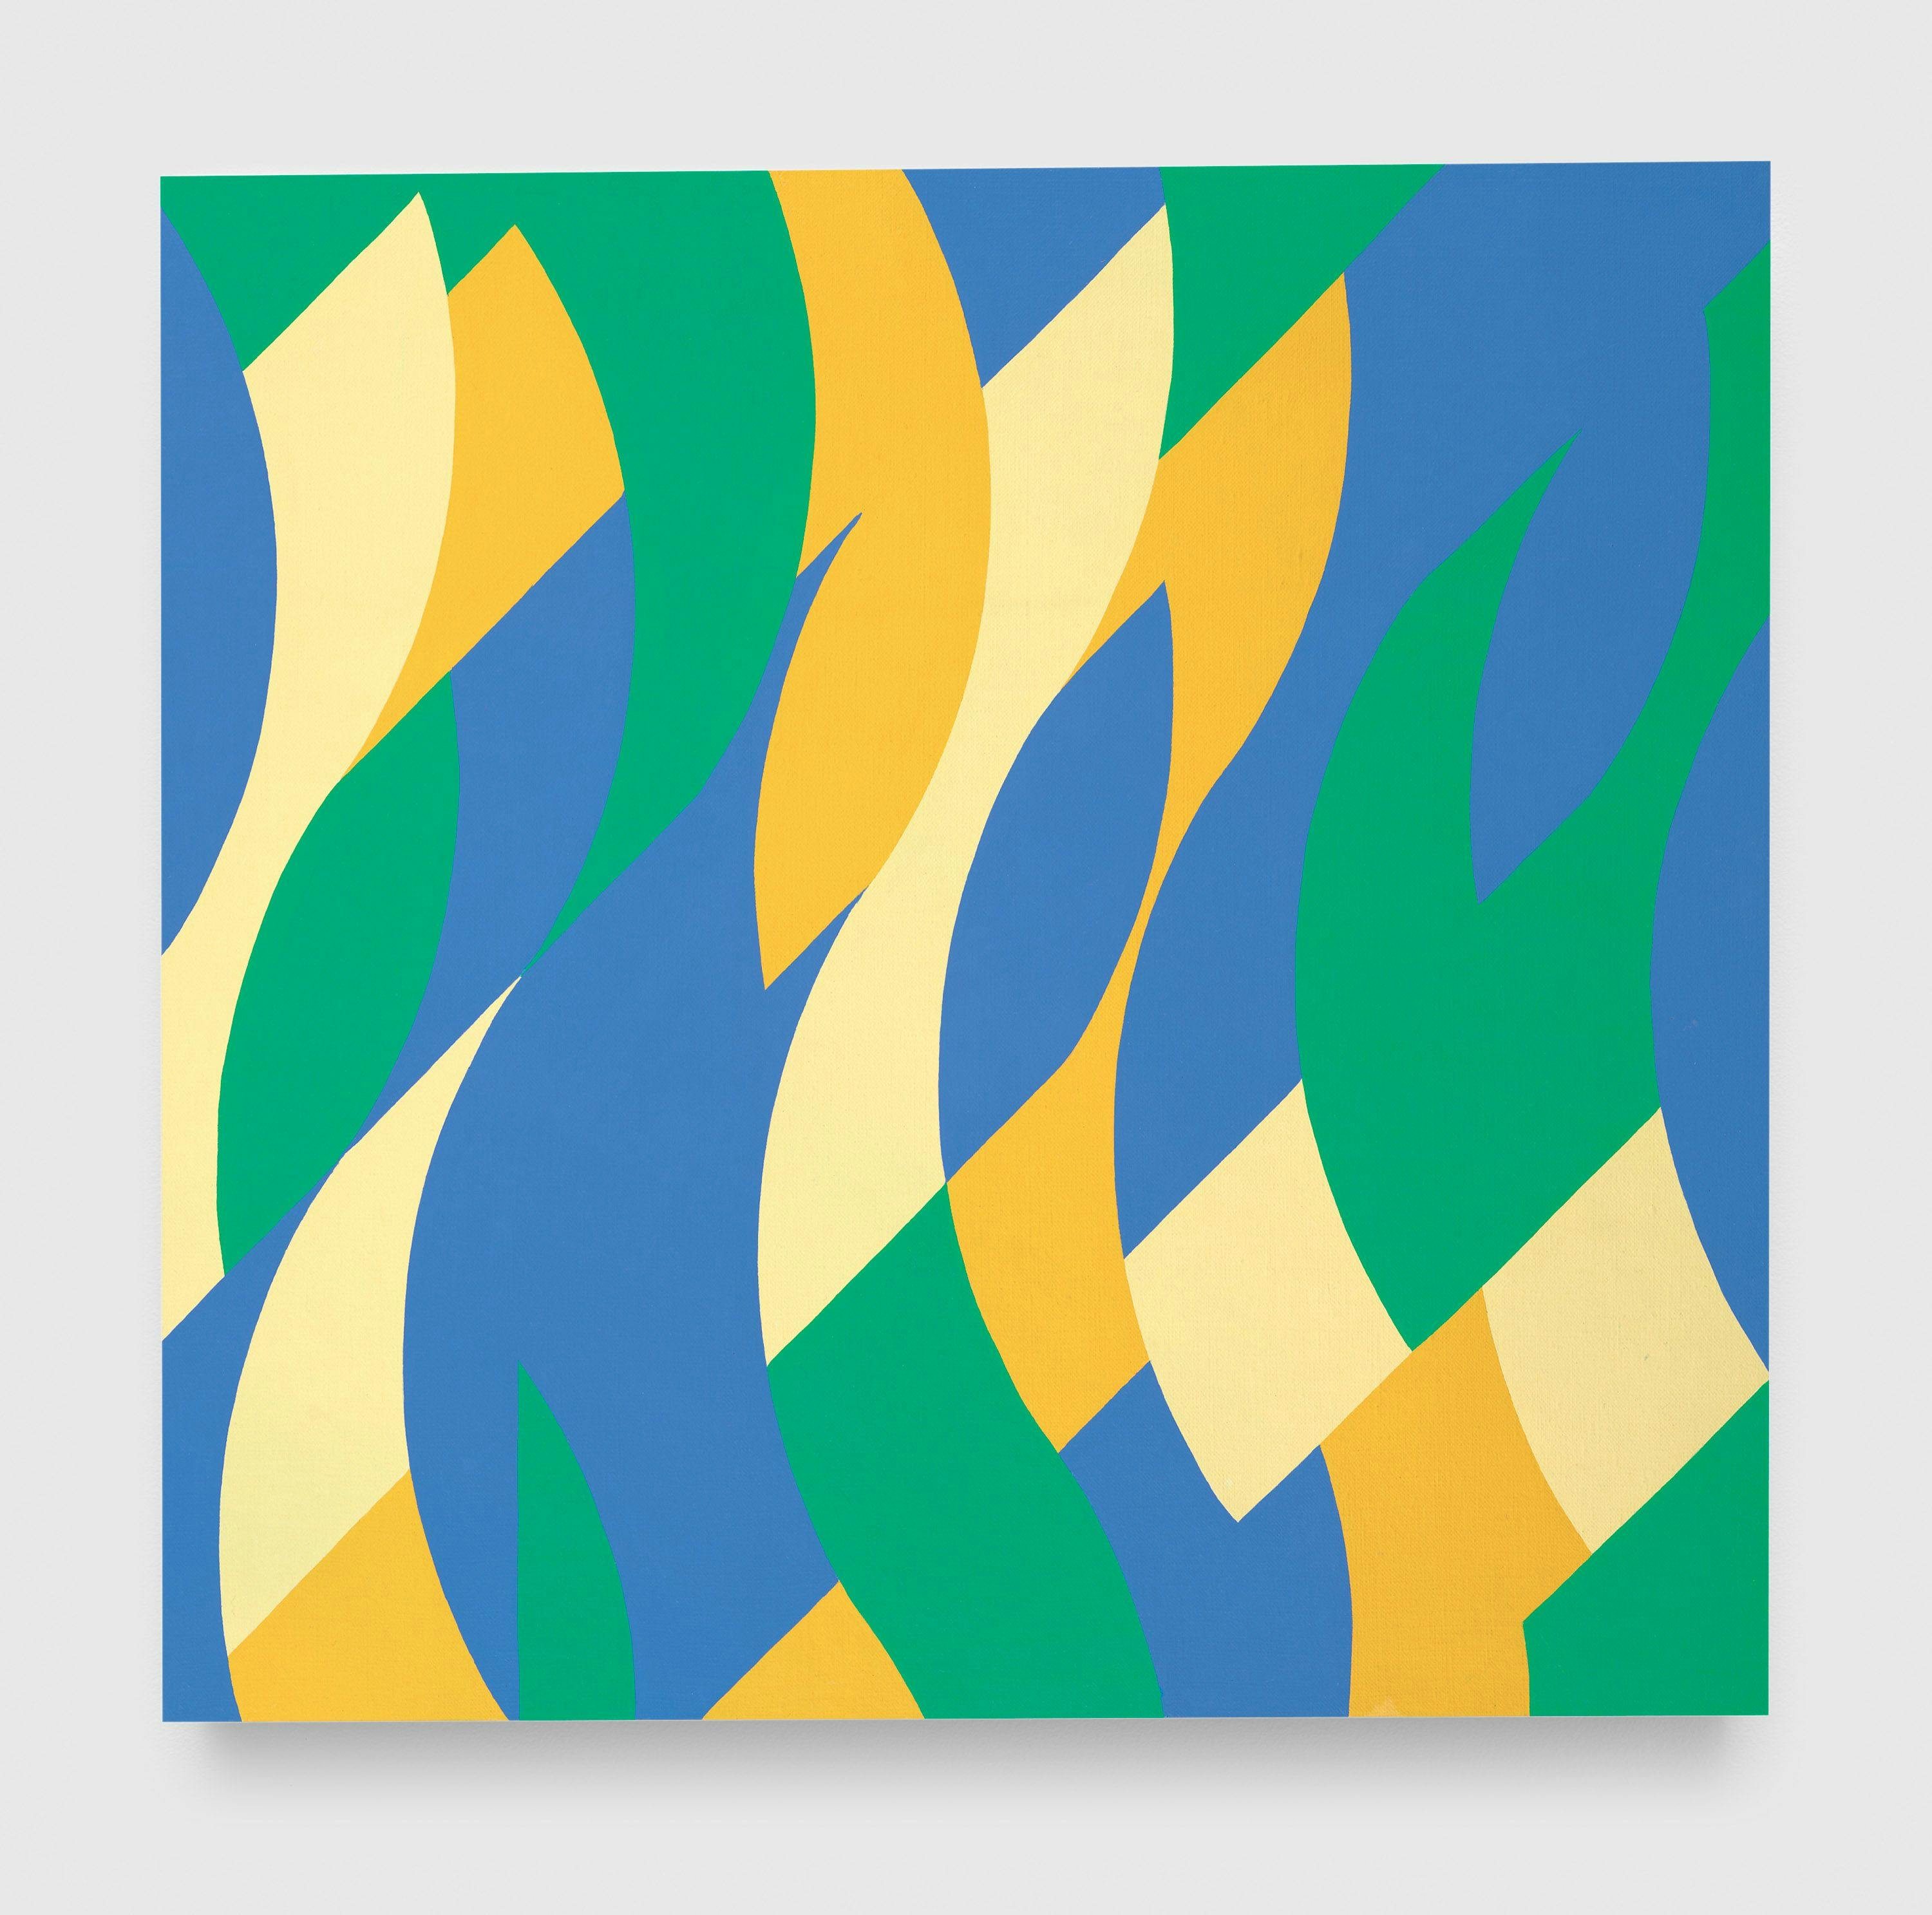 A painting by Bridget Riley, titled Rêve, dated 1999.